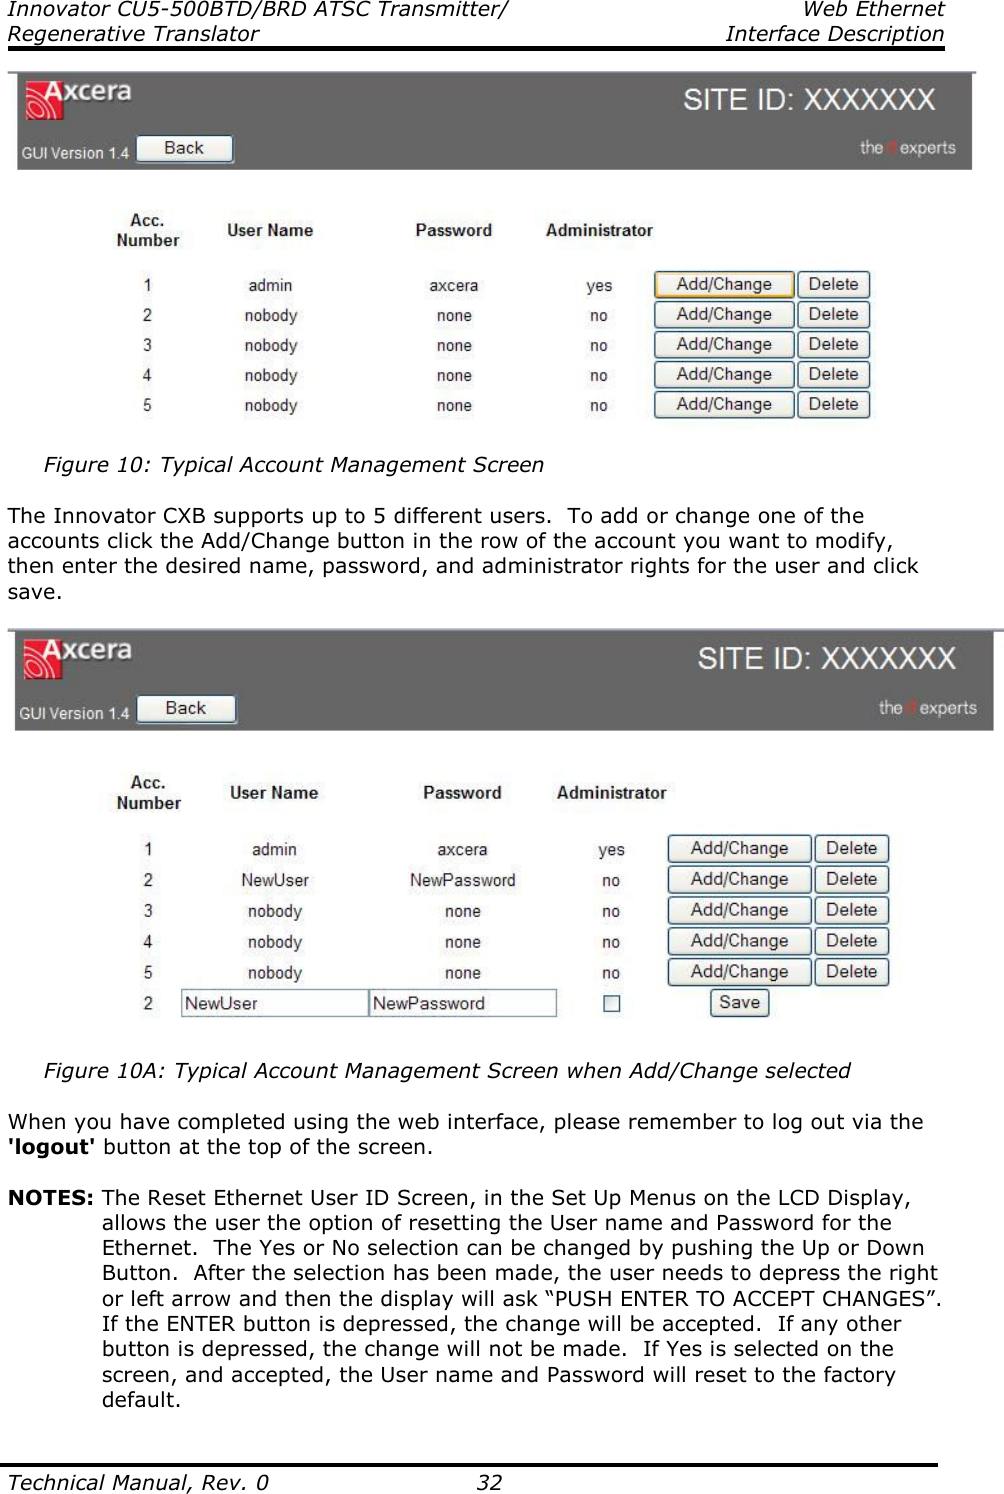 Innovator CU5-500BTD/BRD ATSC Transmitter/  Web Ethernet Regenerative Translator    Interface Description  Technical Manual, Rev. 0    32       Figure 10: Typical Account Management Screen  The Innovator CXB supports up to 5 different users.  To add or change one of the accounts click the Add/Change button in the row of the account you want to modify, then enter the desired name, password, and administrator rights for the user and click save.        Figure 10A: Typical Account Management Screen when Add/Change selected  When you have completed using the web interface, please remember to log out via the &apos;logout&apos; button at the top of the screen.  NOTES: The Reset Ethernet User ID Screen, in the Set Up Menus on the LCD Display, allows the user the option of resetting the User name and Password for the Ethernet.  The Yes or No selection can be changed by pushing the Up or Down Button.  After the selection has been made, the user needs to depress the right or left arrow and then the display will ask “PUSH ENTER TO ACCEPT CHANGES”.  If the ENTER button is depressed, the change will be accepted.  If any other button is depressed, the change will not be made.  If Yes is selected on the screen, and accepted, the User name and Password will reset to the factory default. 